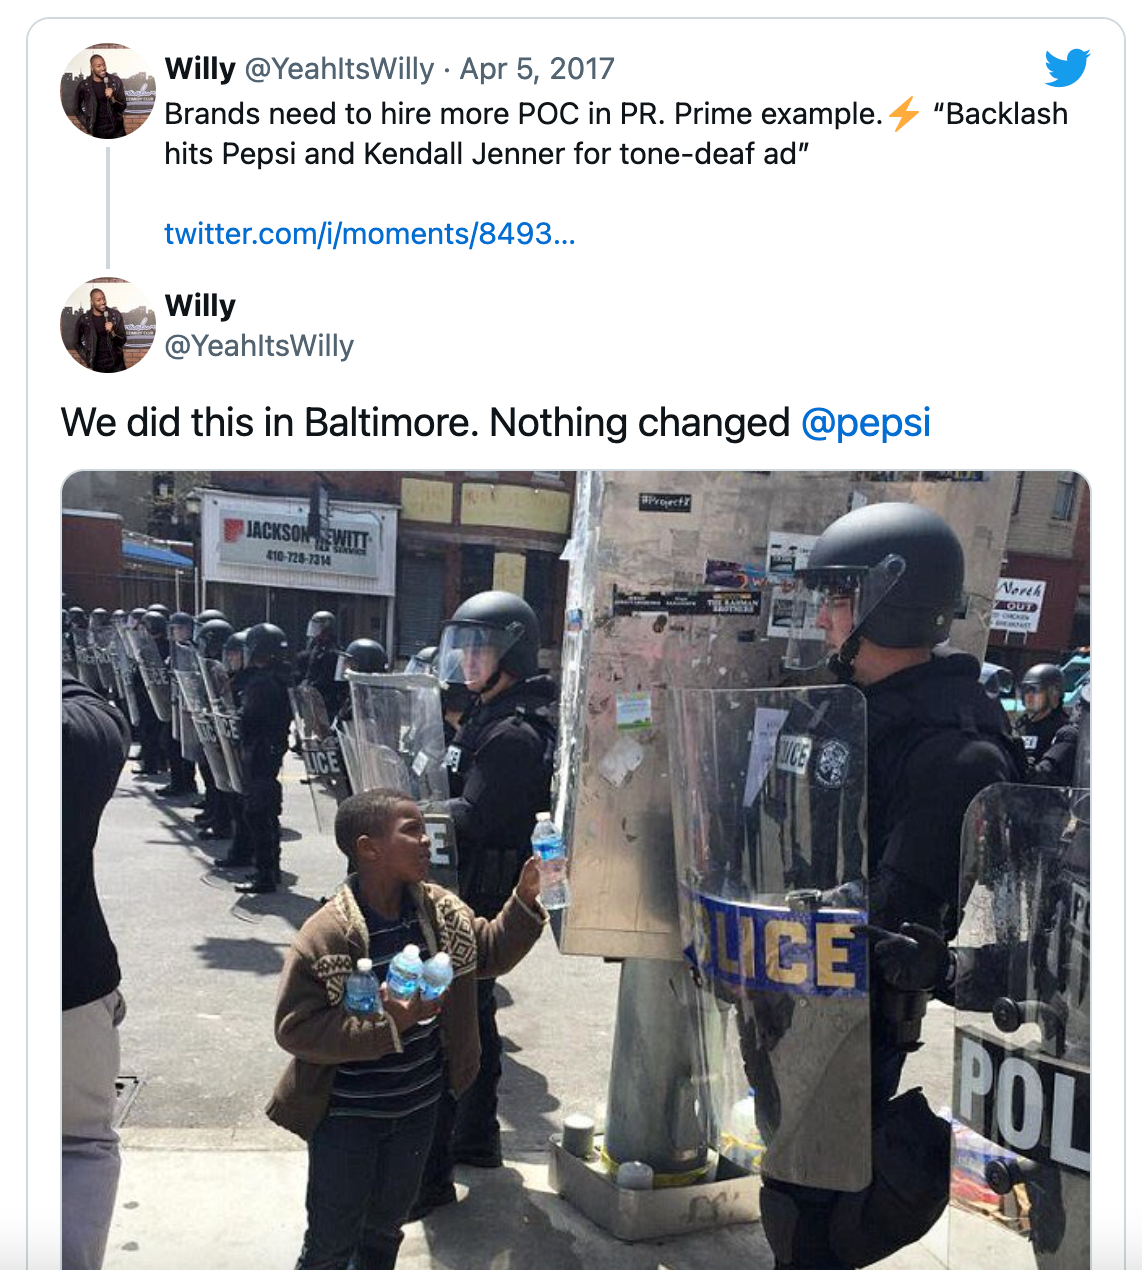 A tweet in response to the Pepsi ad